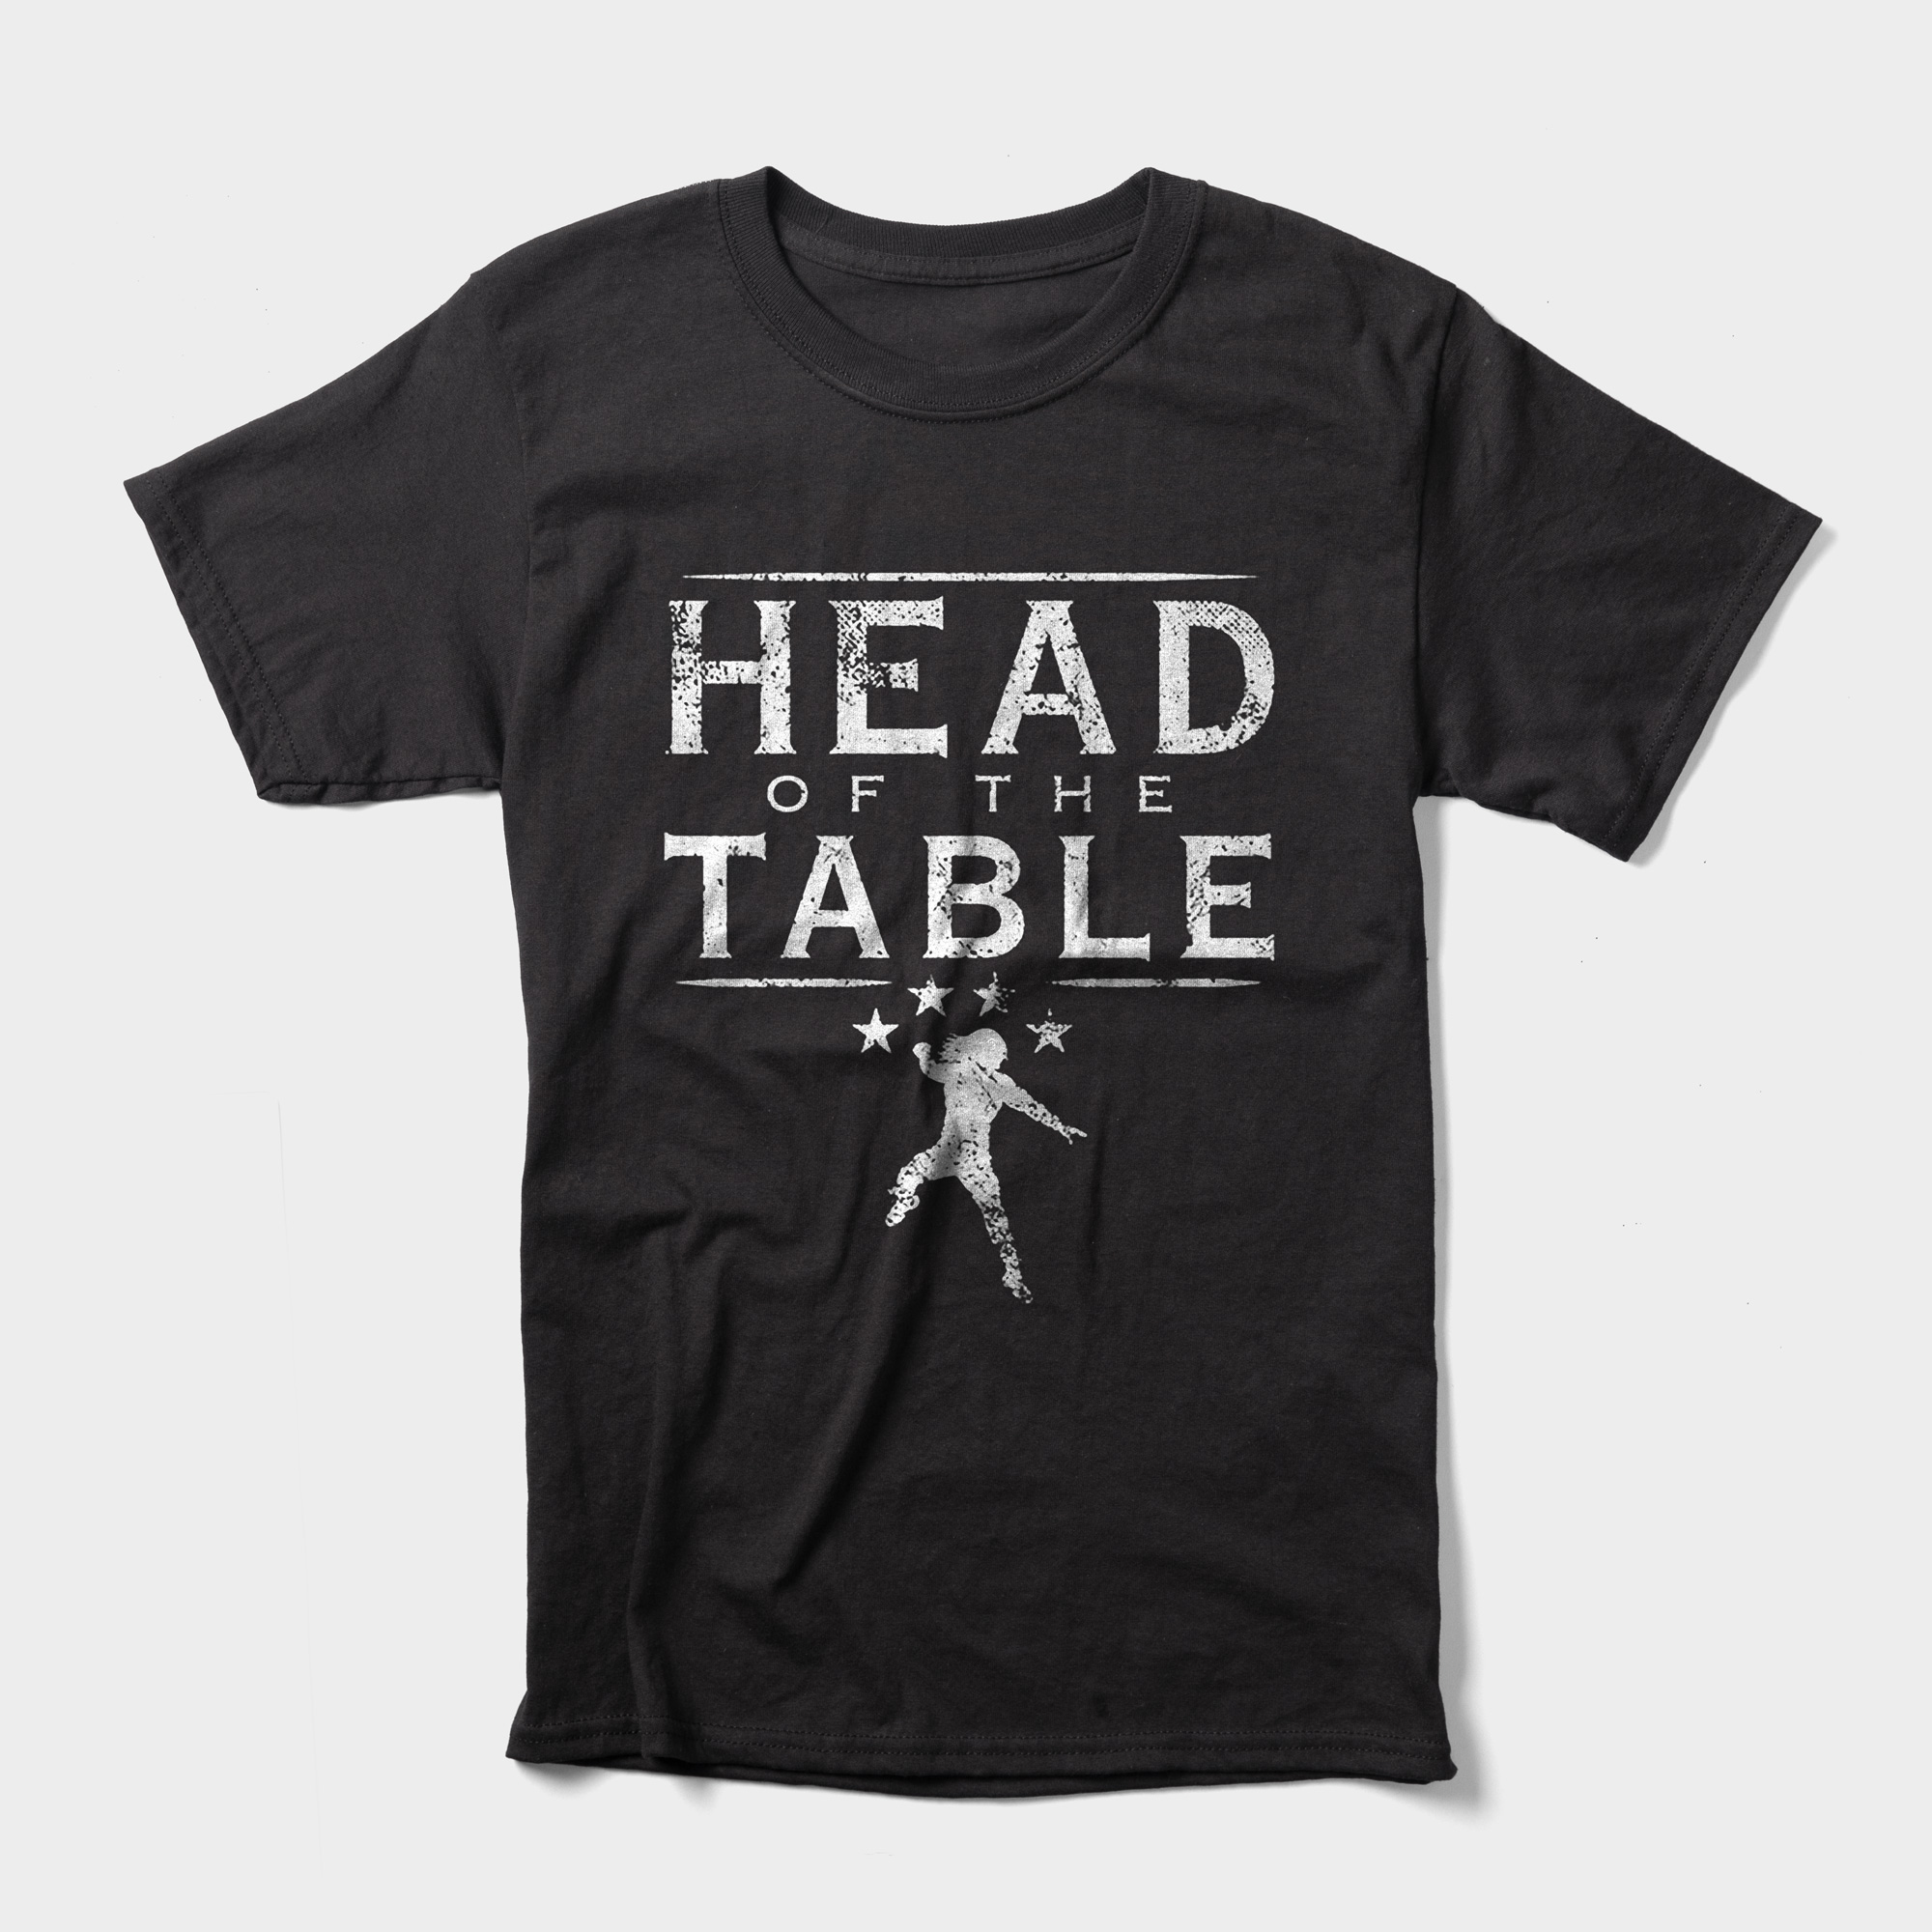 Roman Reigns' t-shirt features bold lettering that reads "Head of the Table" with a white figure performing his signature Superman Punch. 